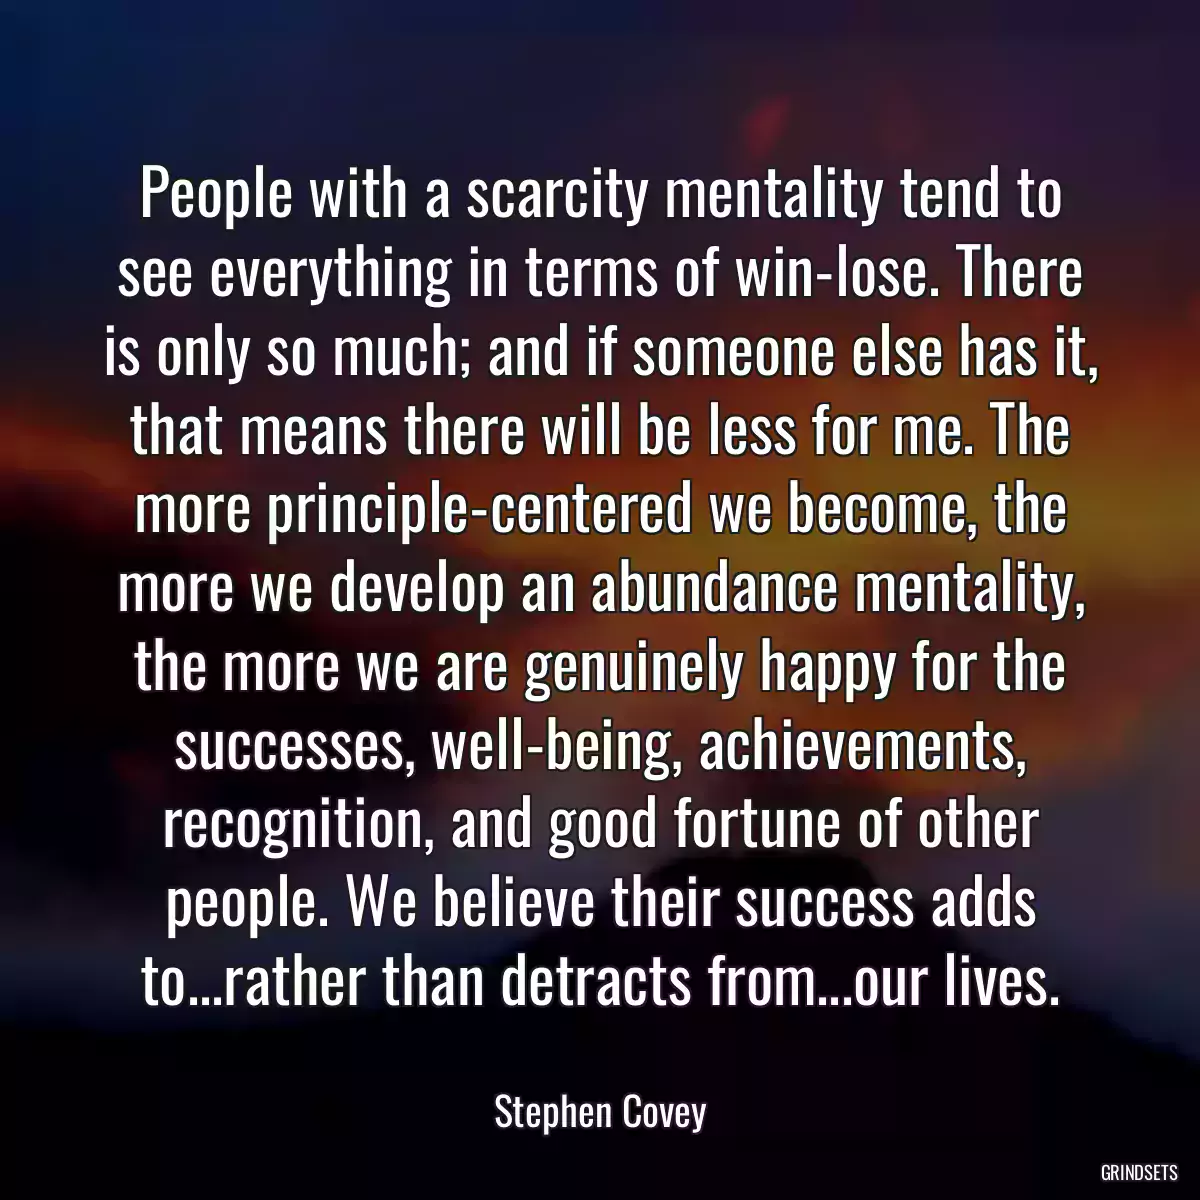 People with a scarcity mentality tend to see everything in terms of win-lose. There is only so much; and if someone else has it, that means there will be less for me. The more principle-centered we become, the more we develop an abundance mentality, the more we are genuinely happy for the successes, well-being, achievements, recognition, and good fortune of other people. We believe their success adds to...rather than detracts from...our lives.